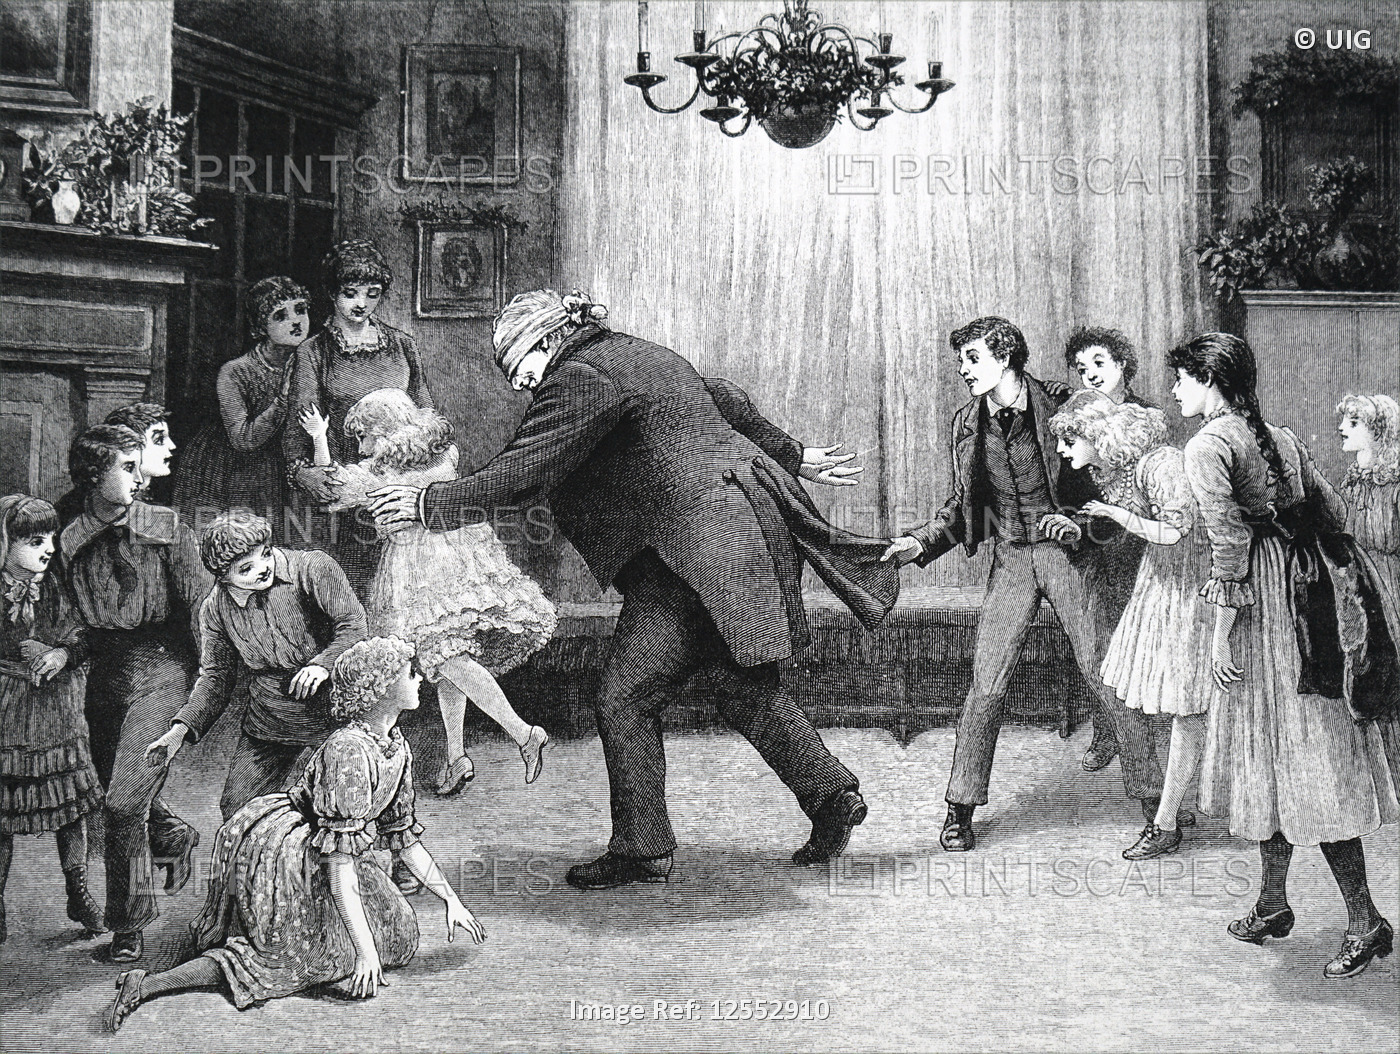 Illustration depicting an older family member playing Blind Man's Bluff, 19th century